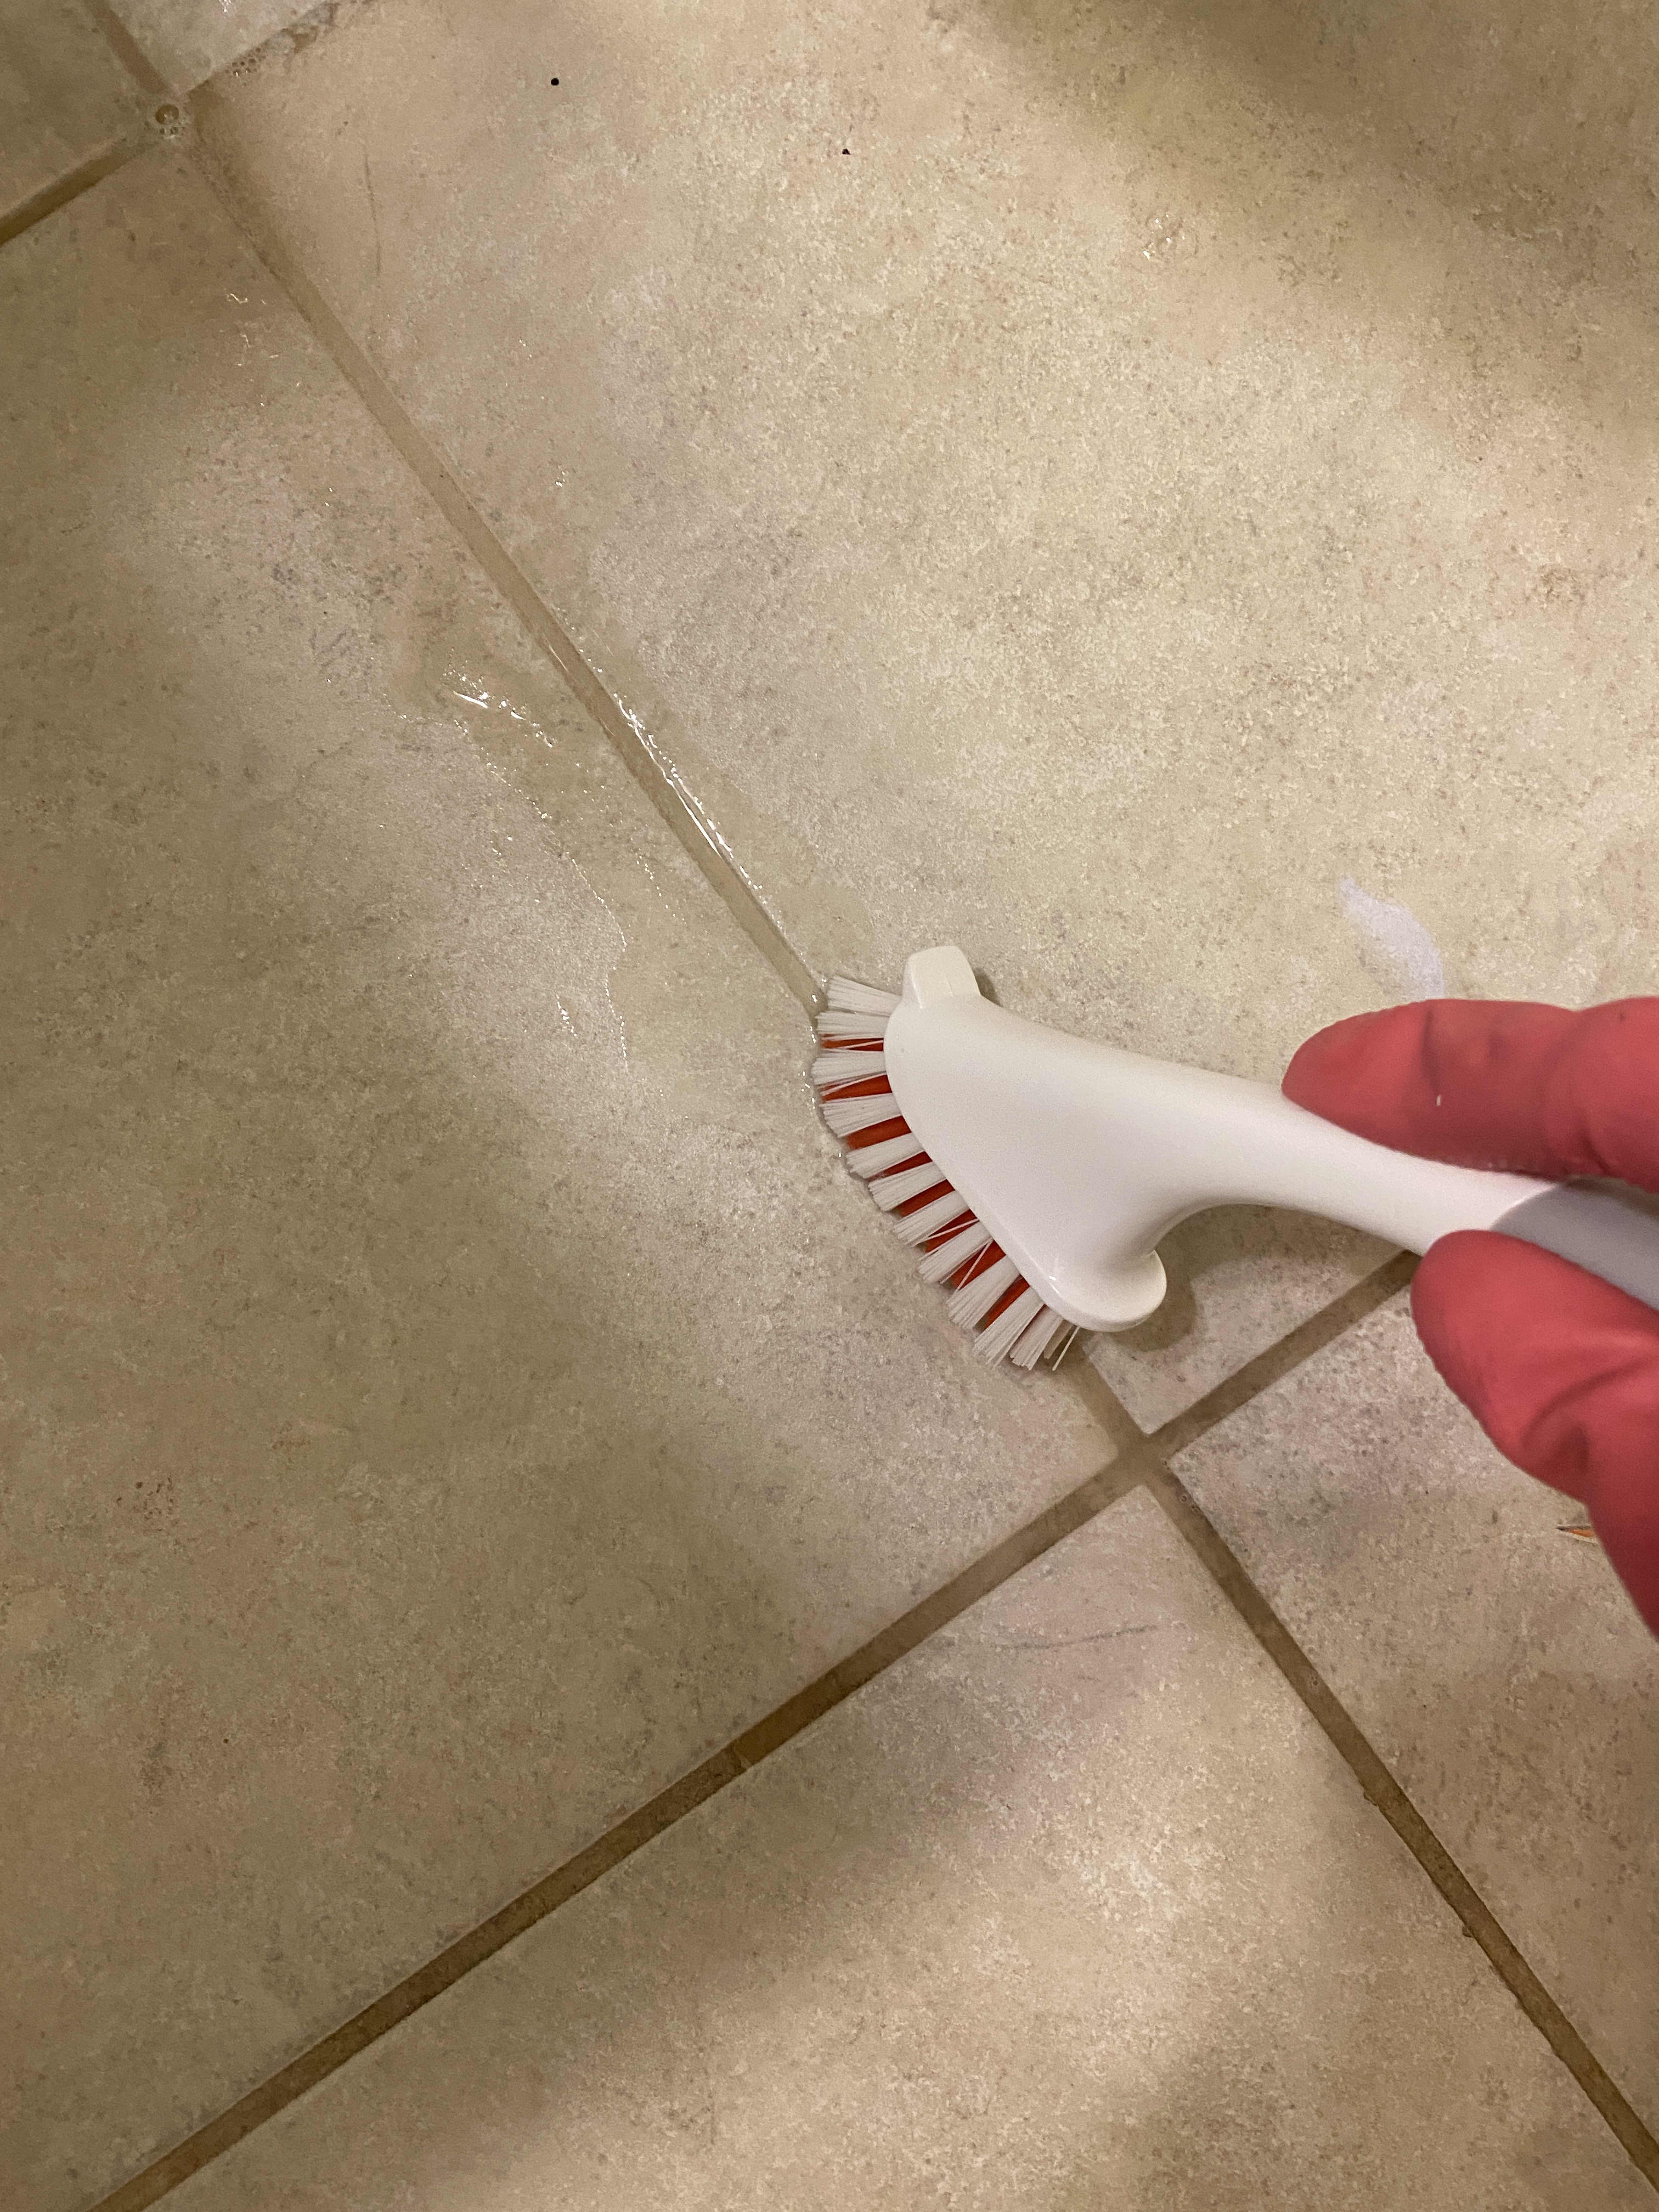 Zep Grout Cleaner Review: Bleach-Free Bathroom Cleaner That Works